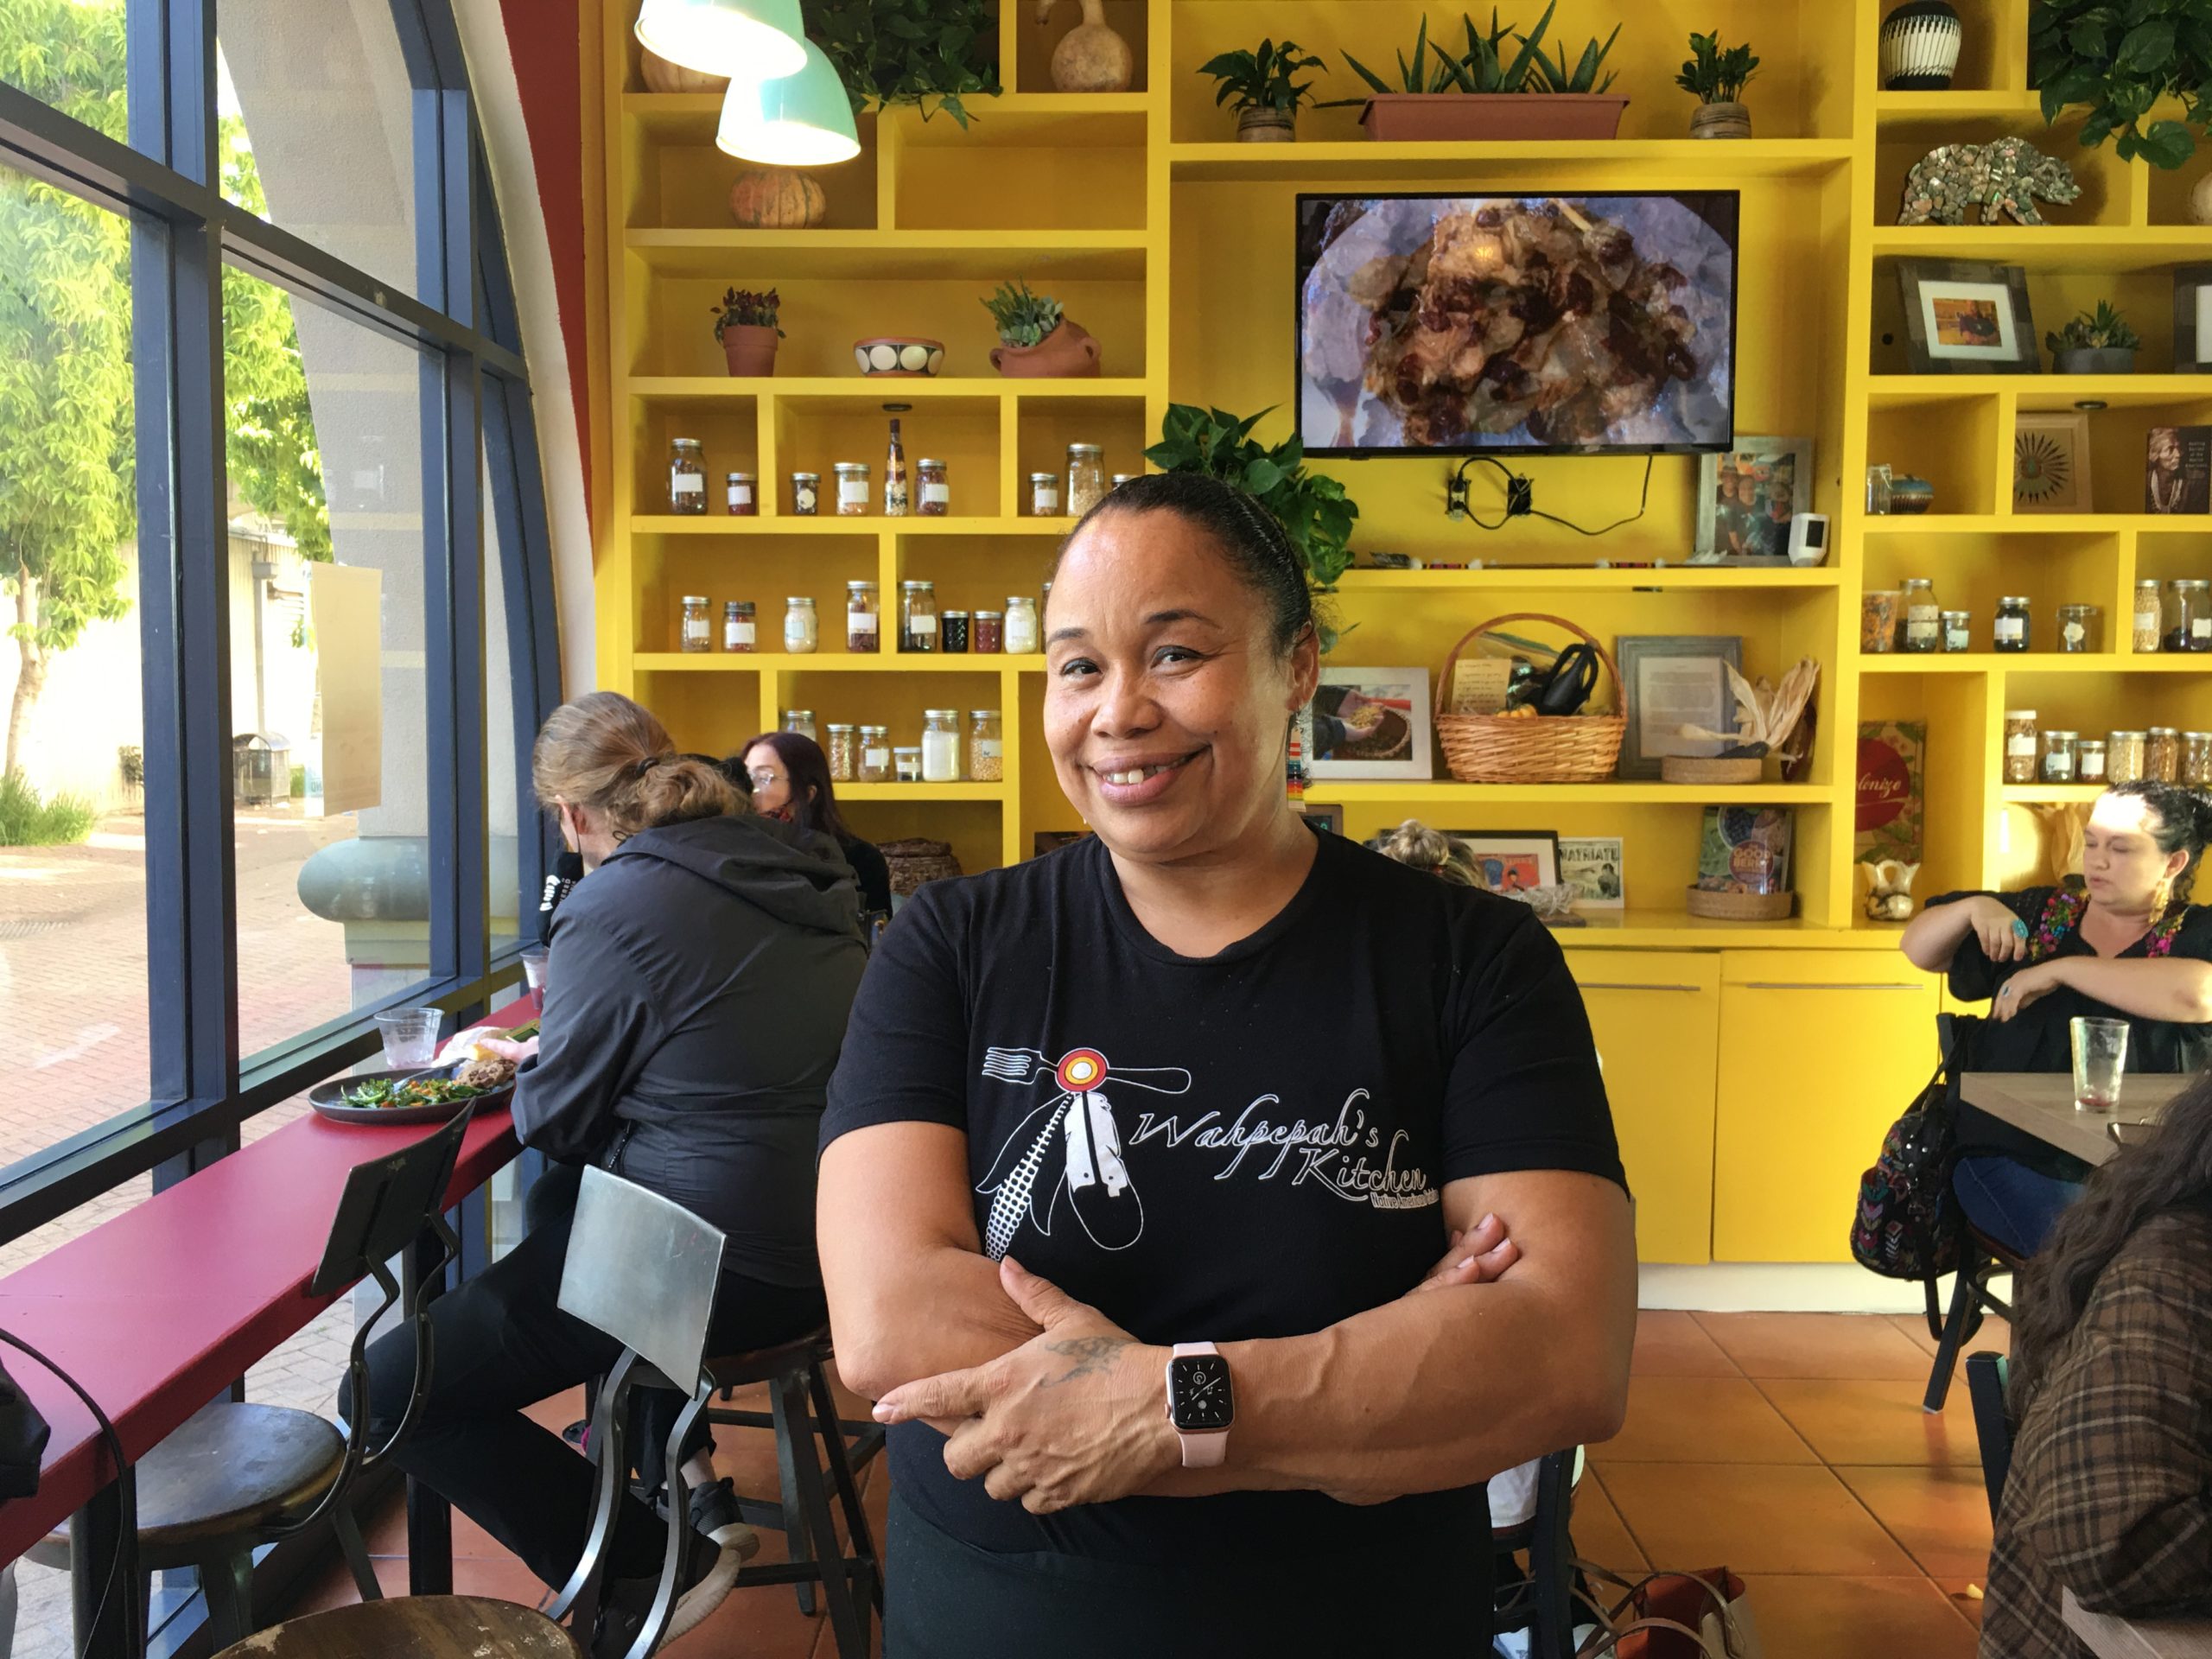 A woman in a black t-shirt posing inside a brightly-colored restaurant